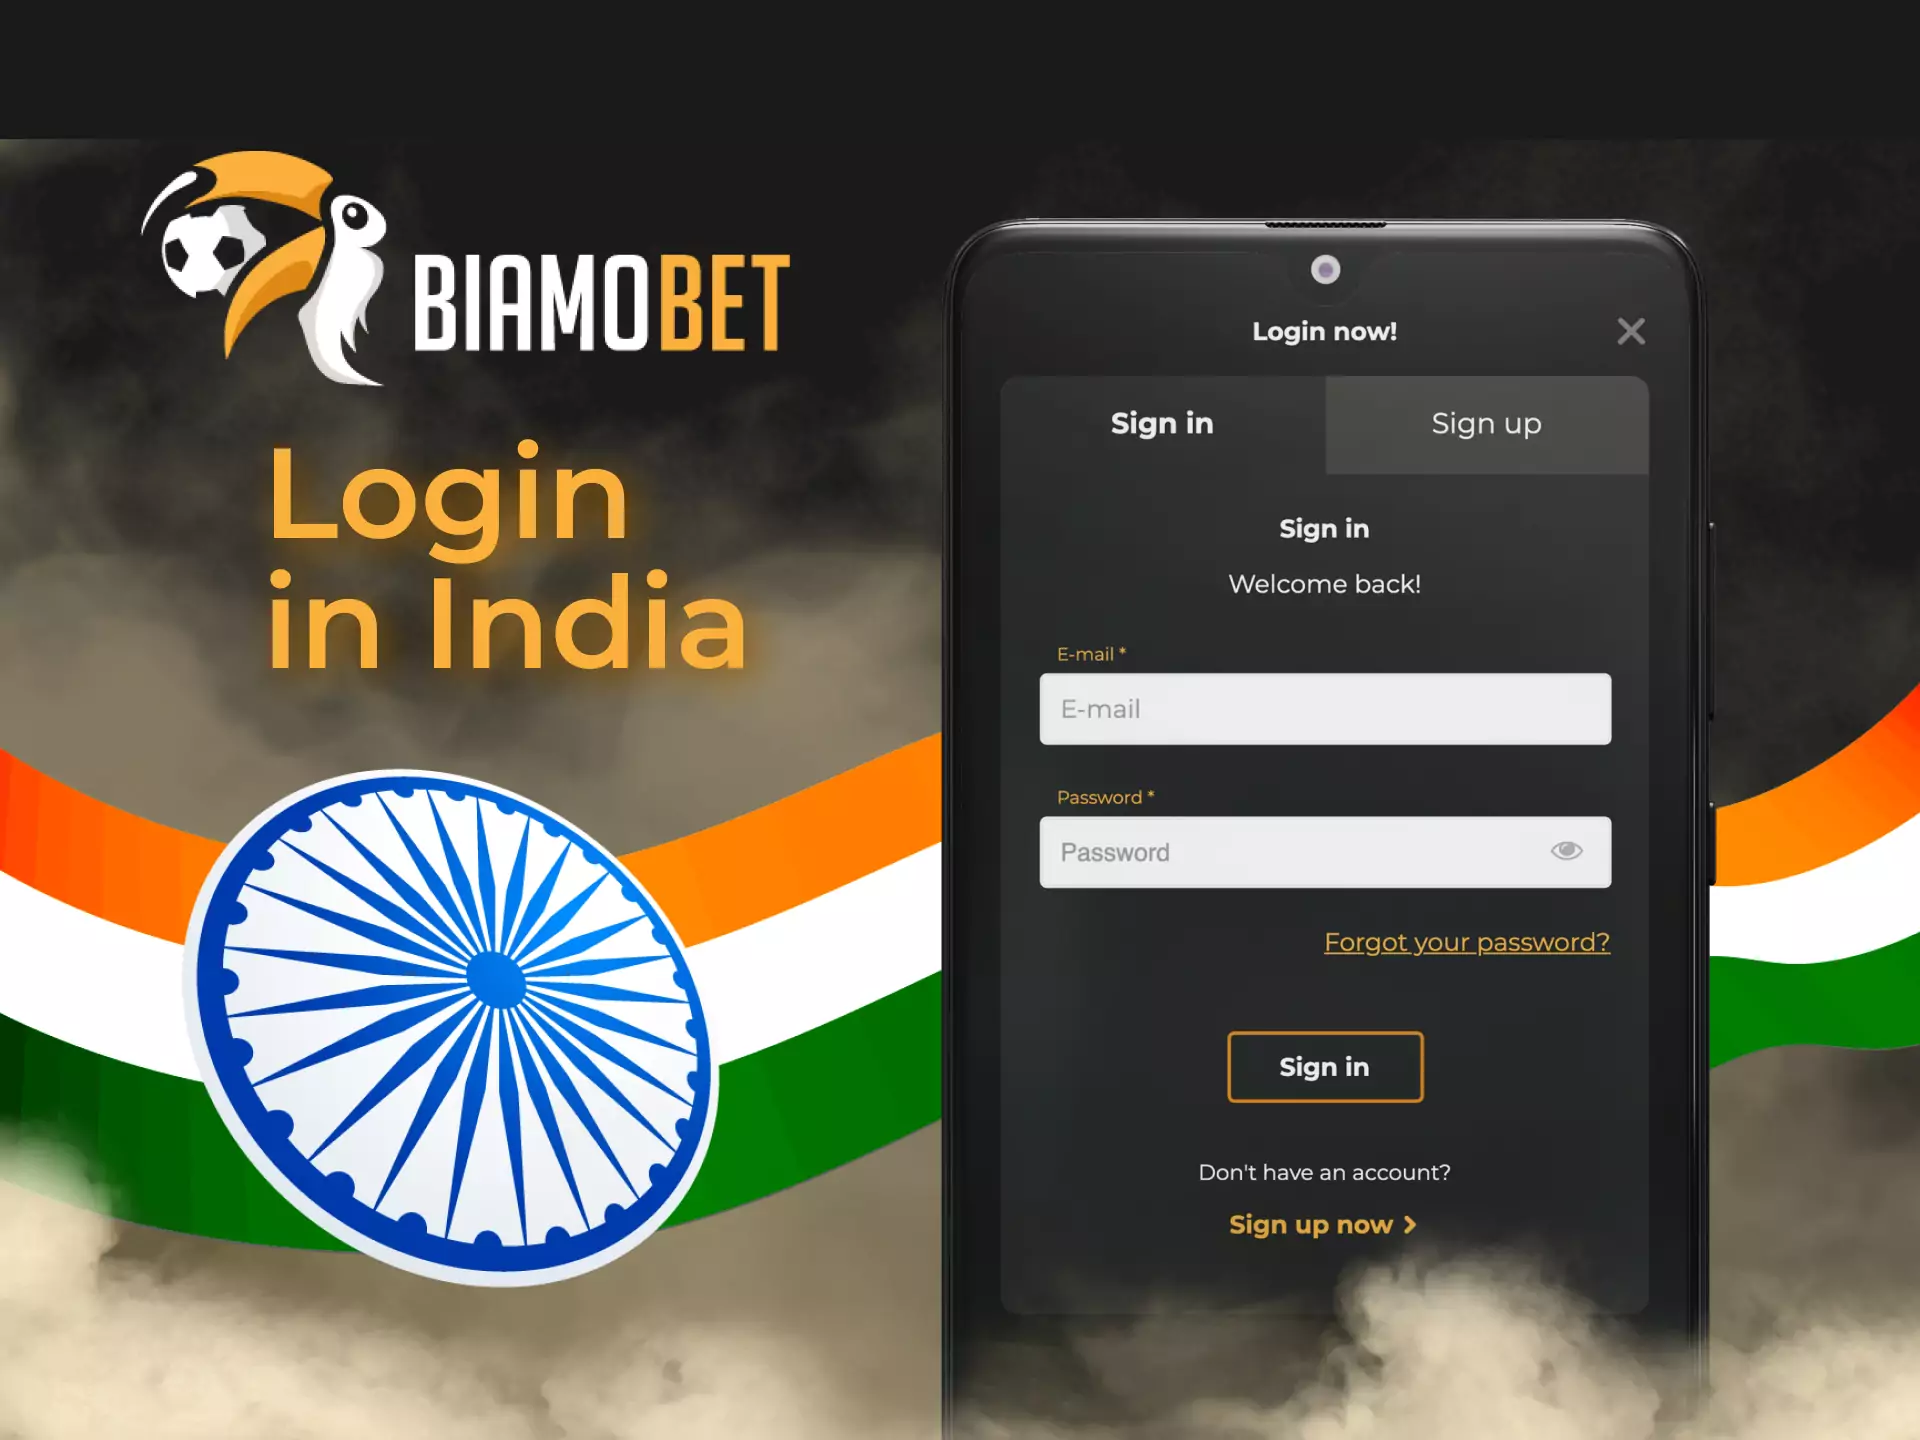 Use your e-mail and password to log in to the Biamobet account in the app.